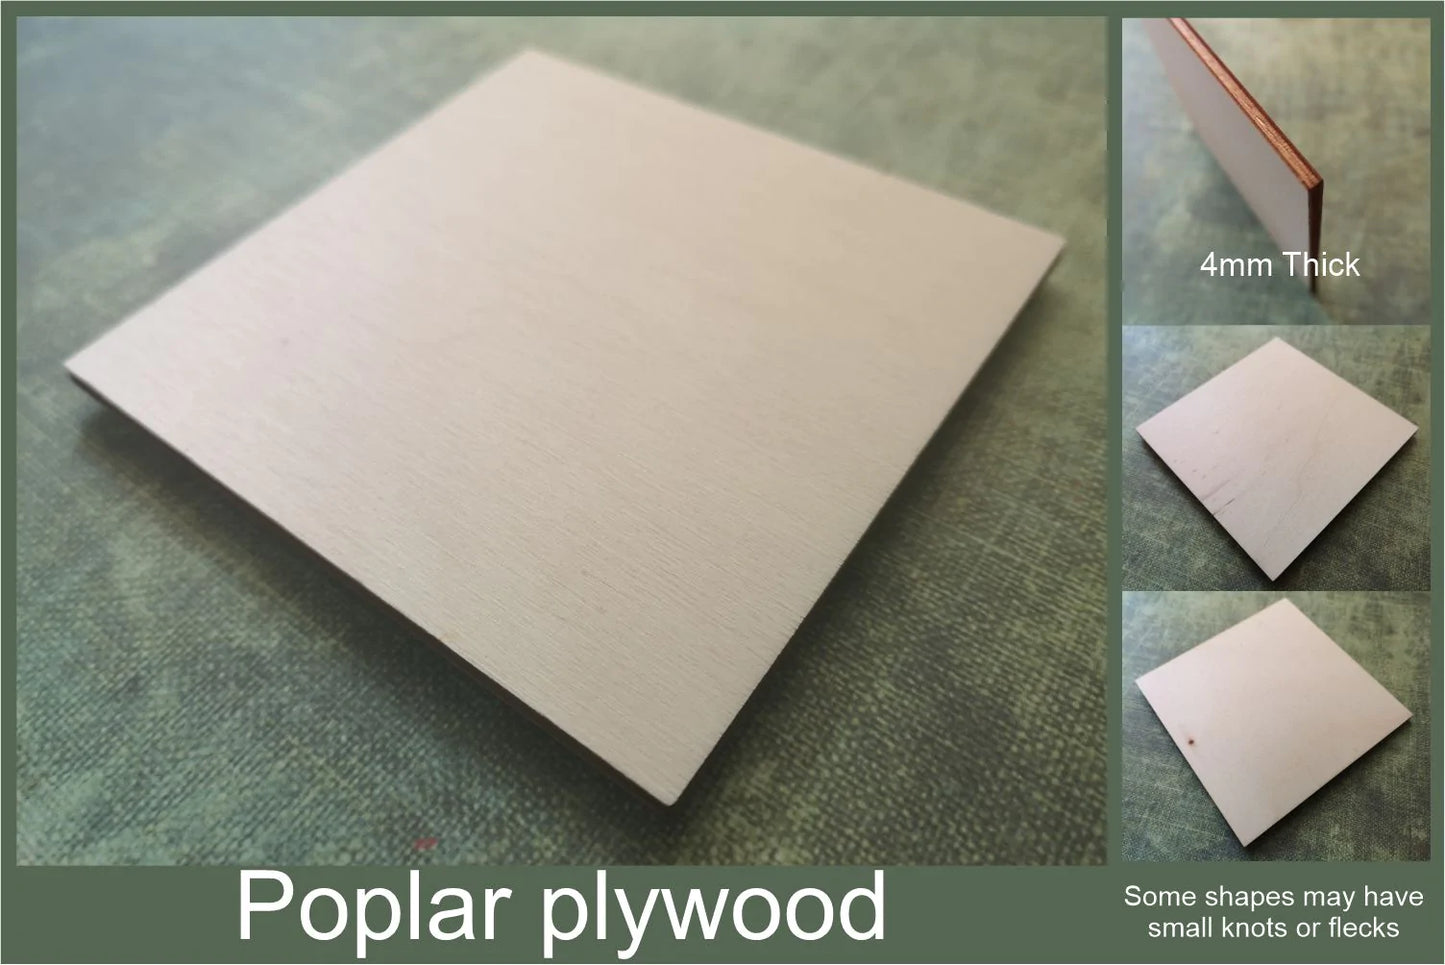 4mm thick poplar plywood used to make the Flower 10 petal cut-outs ready for crafting